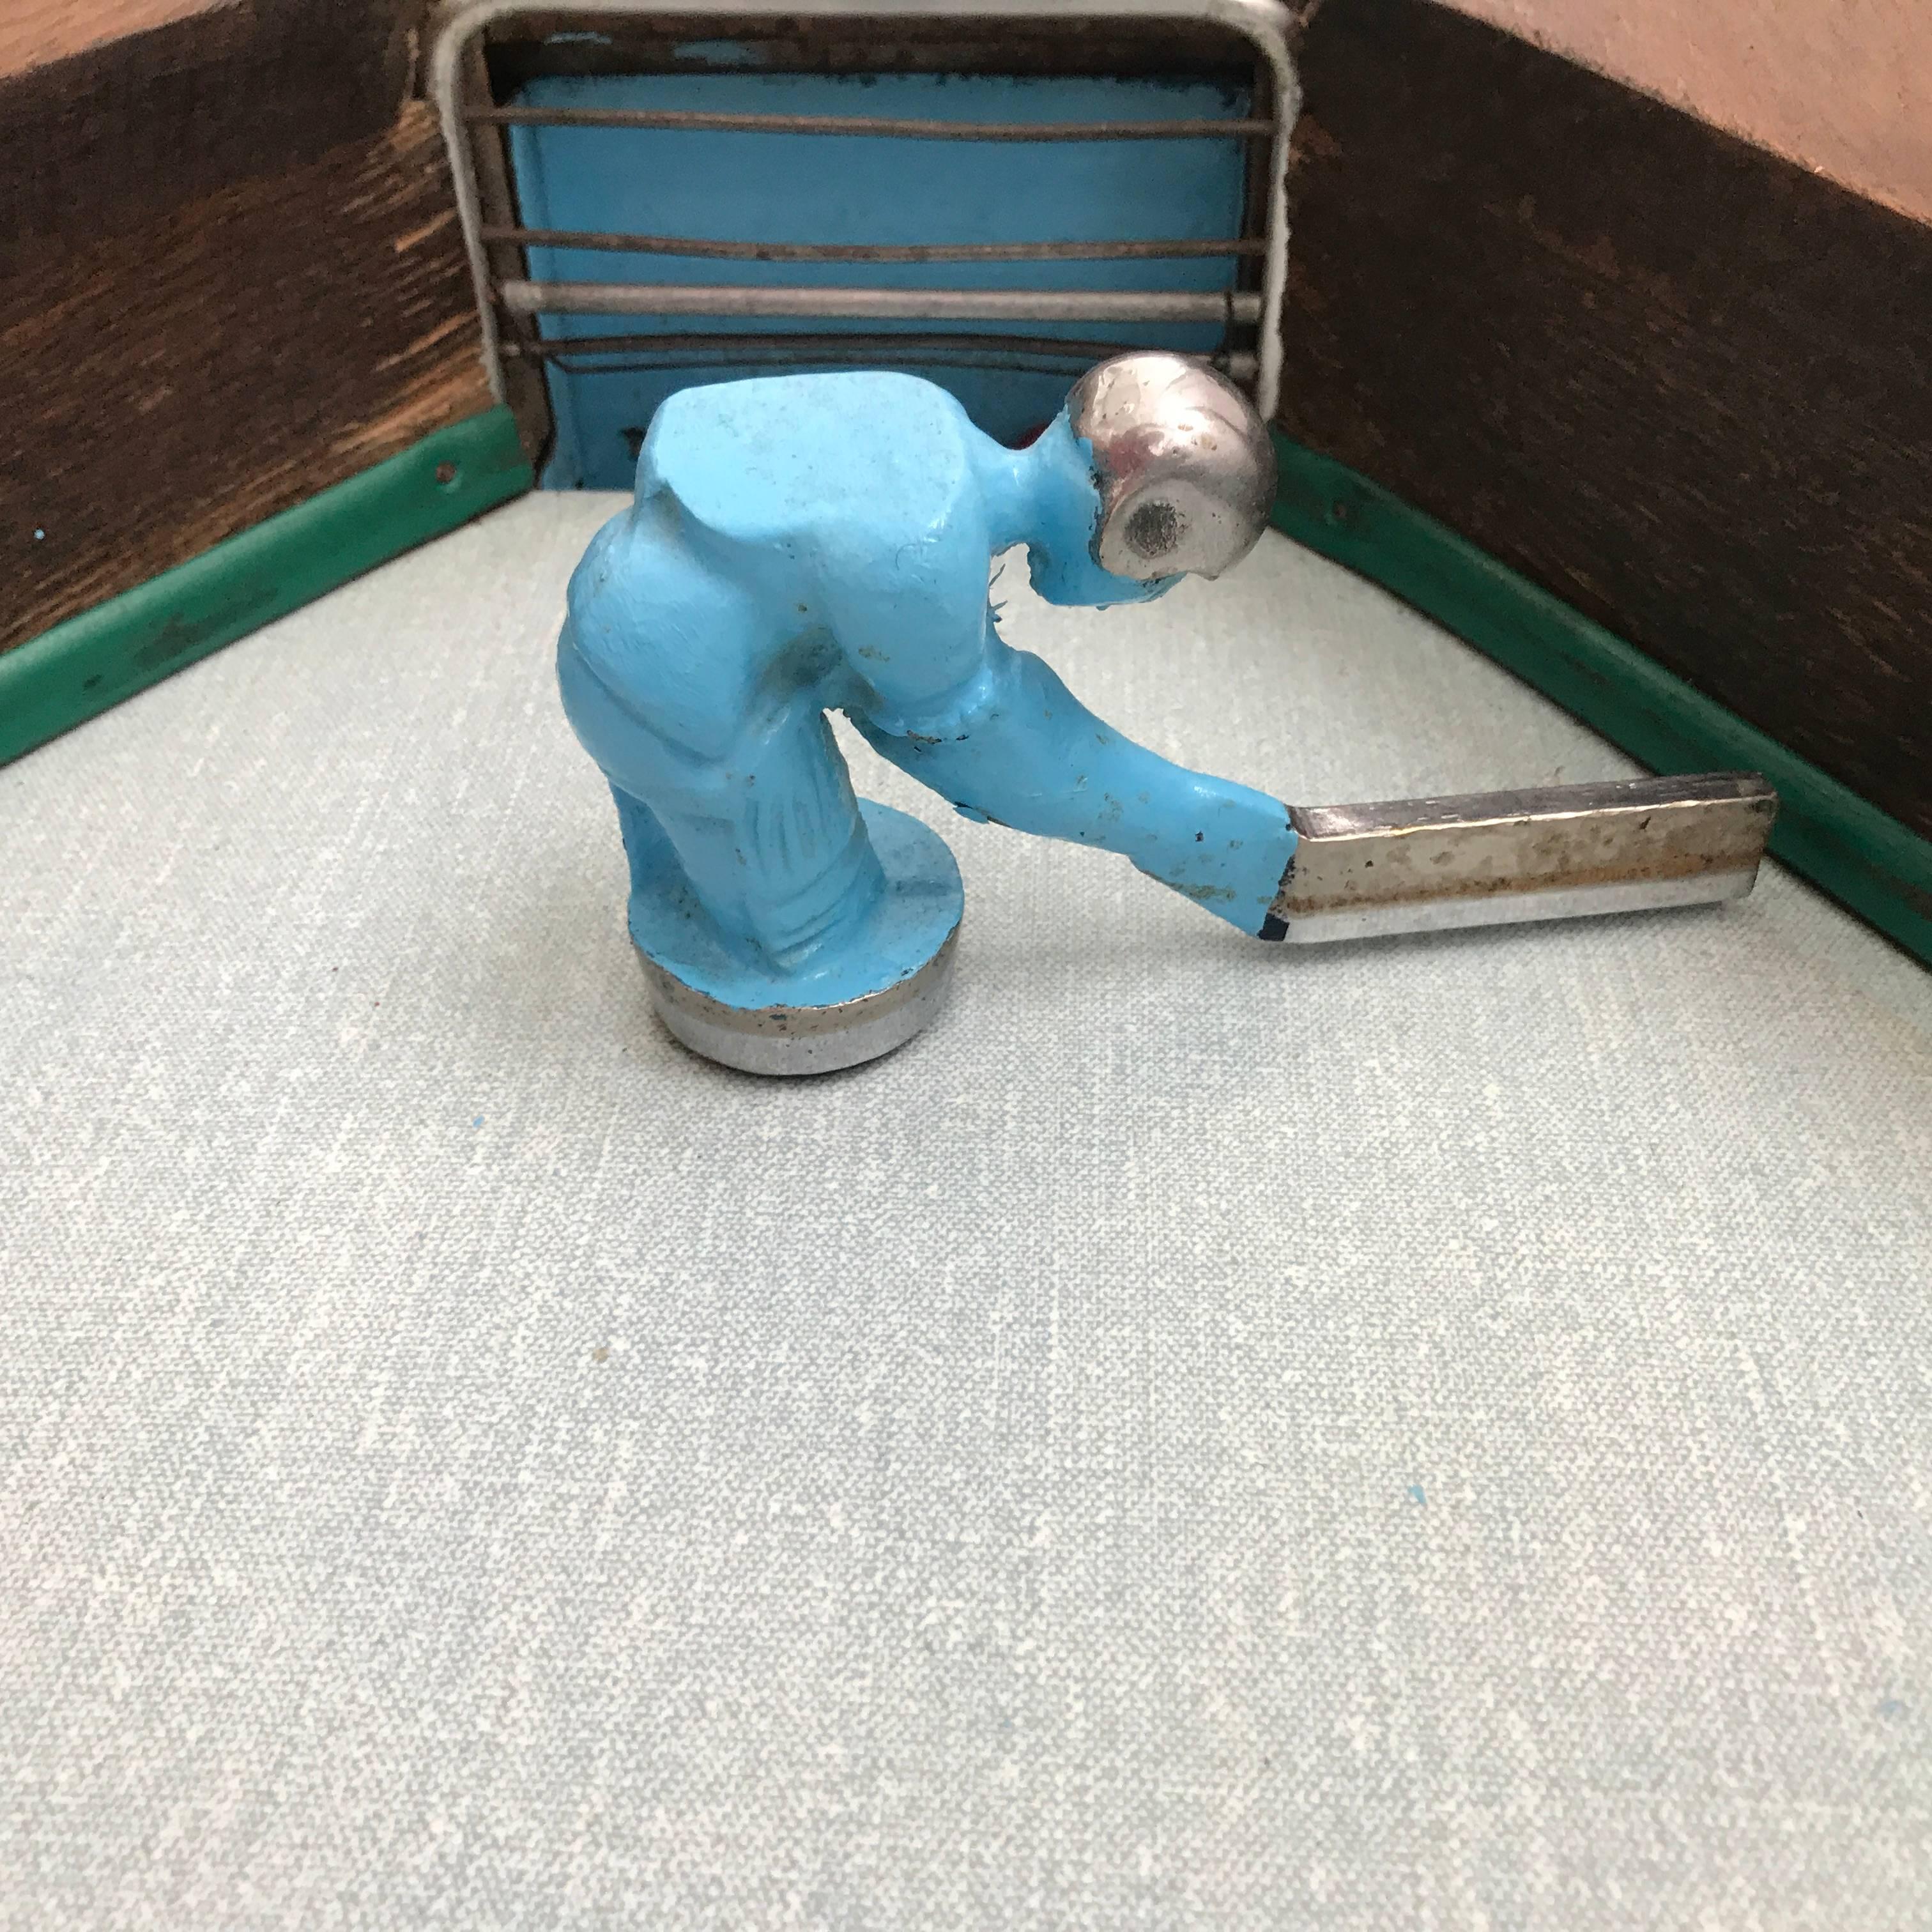 1950s Ruffler & Walker Ice Hockey Coin-Op Game in Solid Oak Cabinet In Good Condition For Sale In London, GB